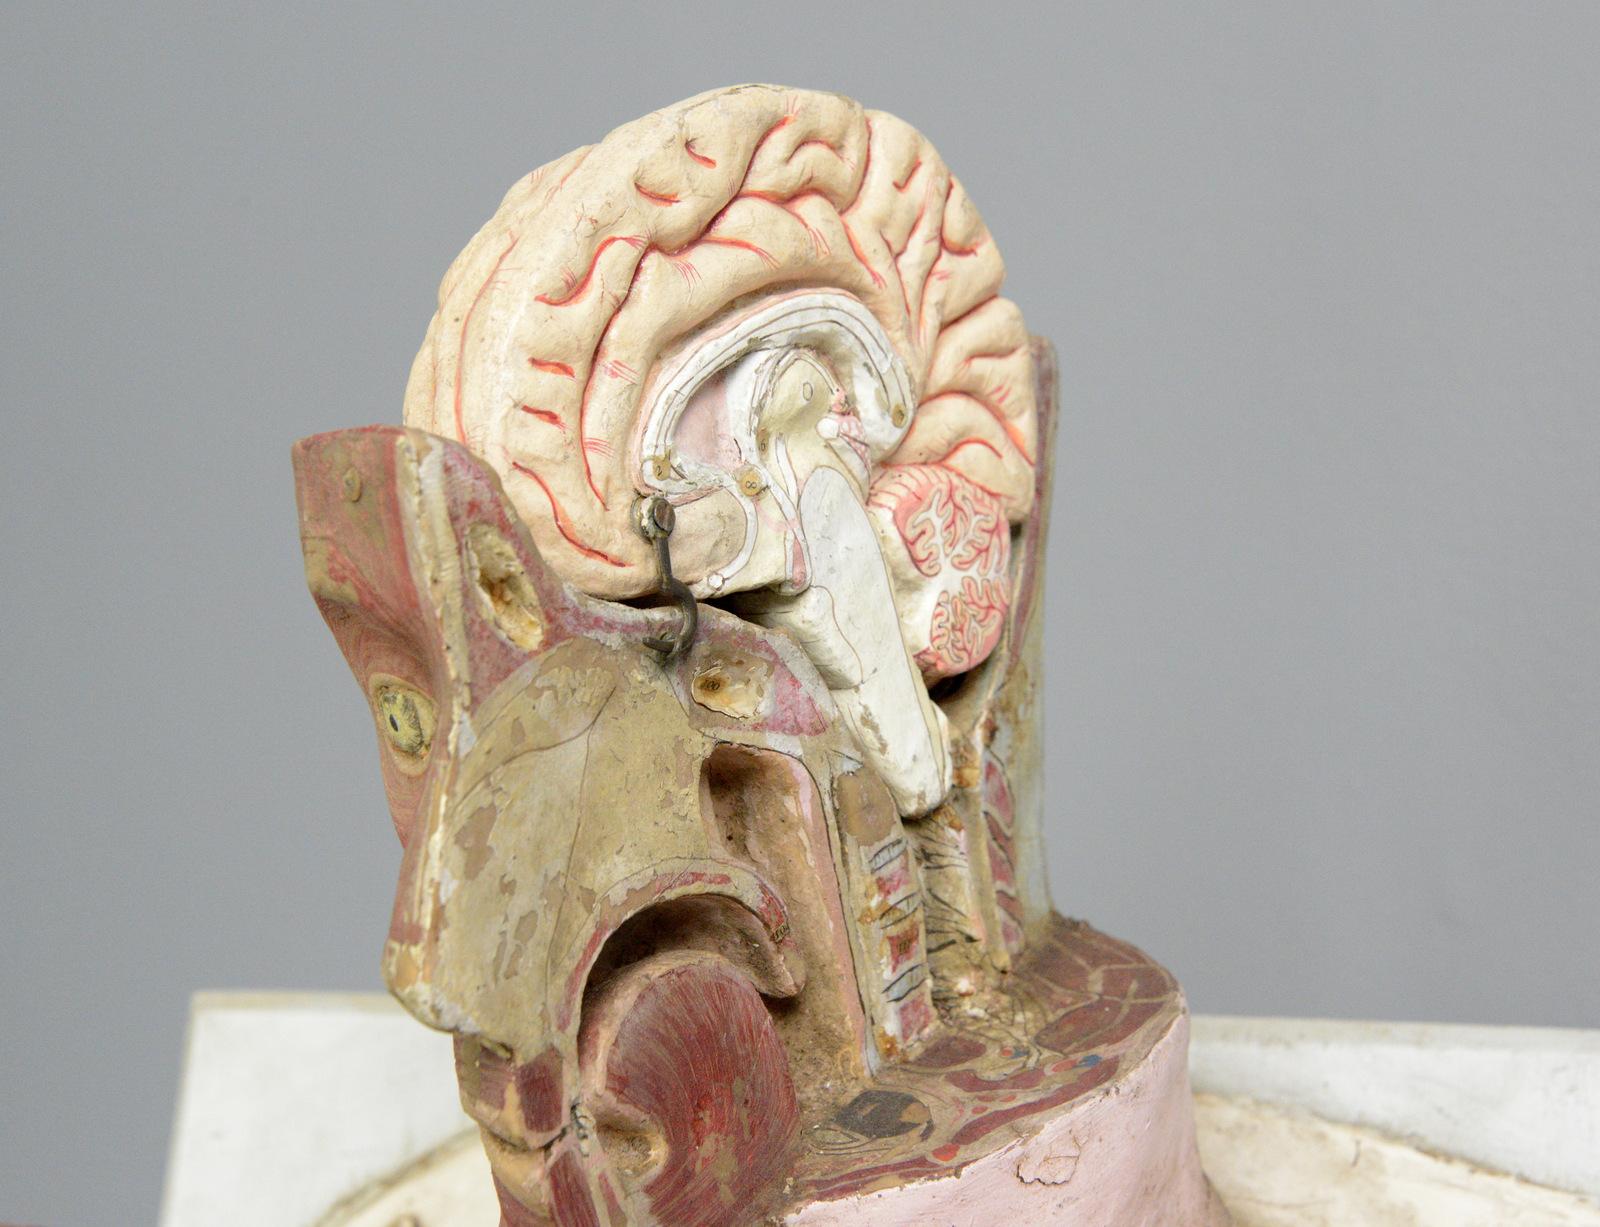 Mid-19th Century 19th Century Anatomical Model by Dr Auzoux